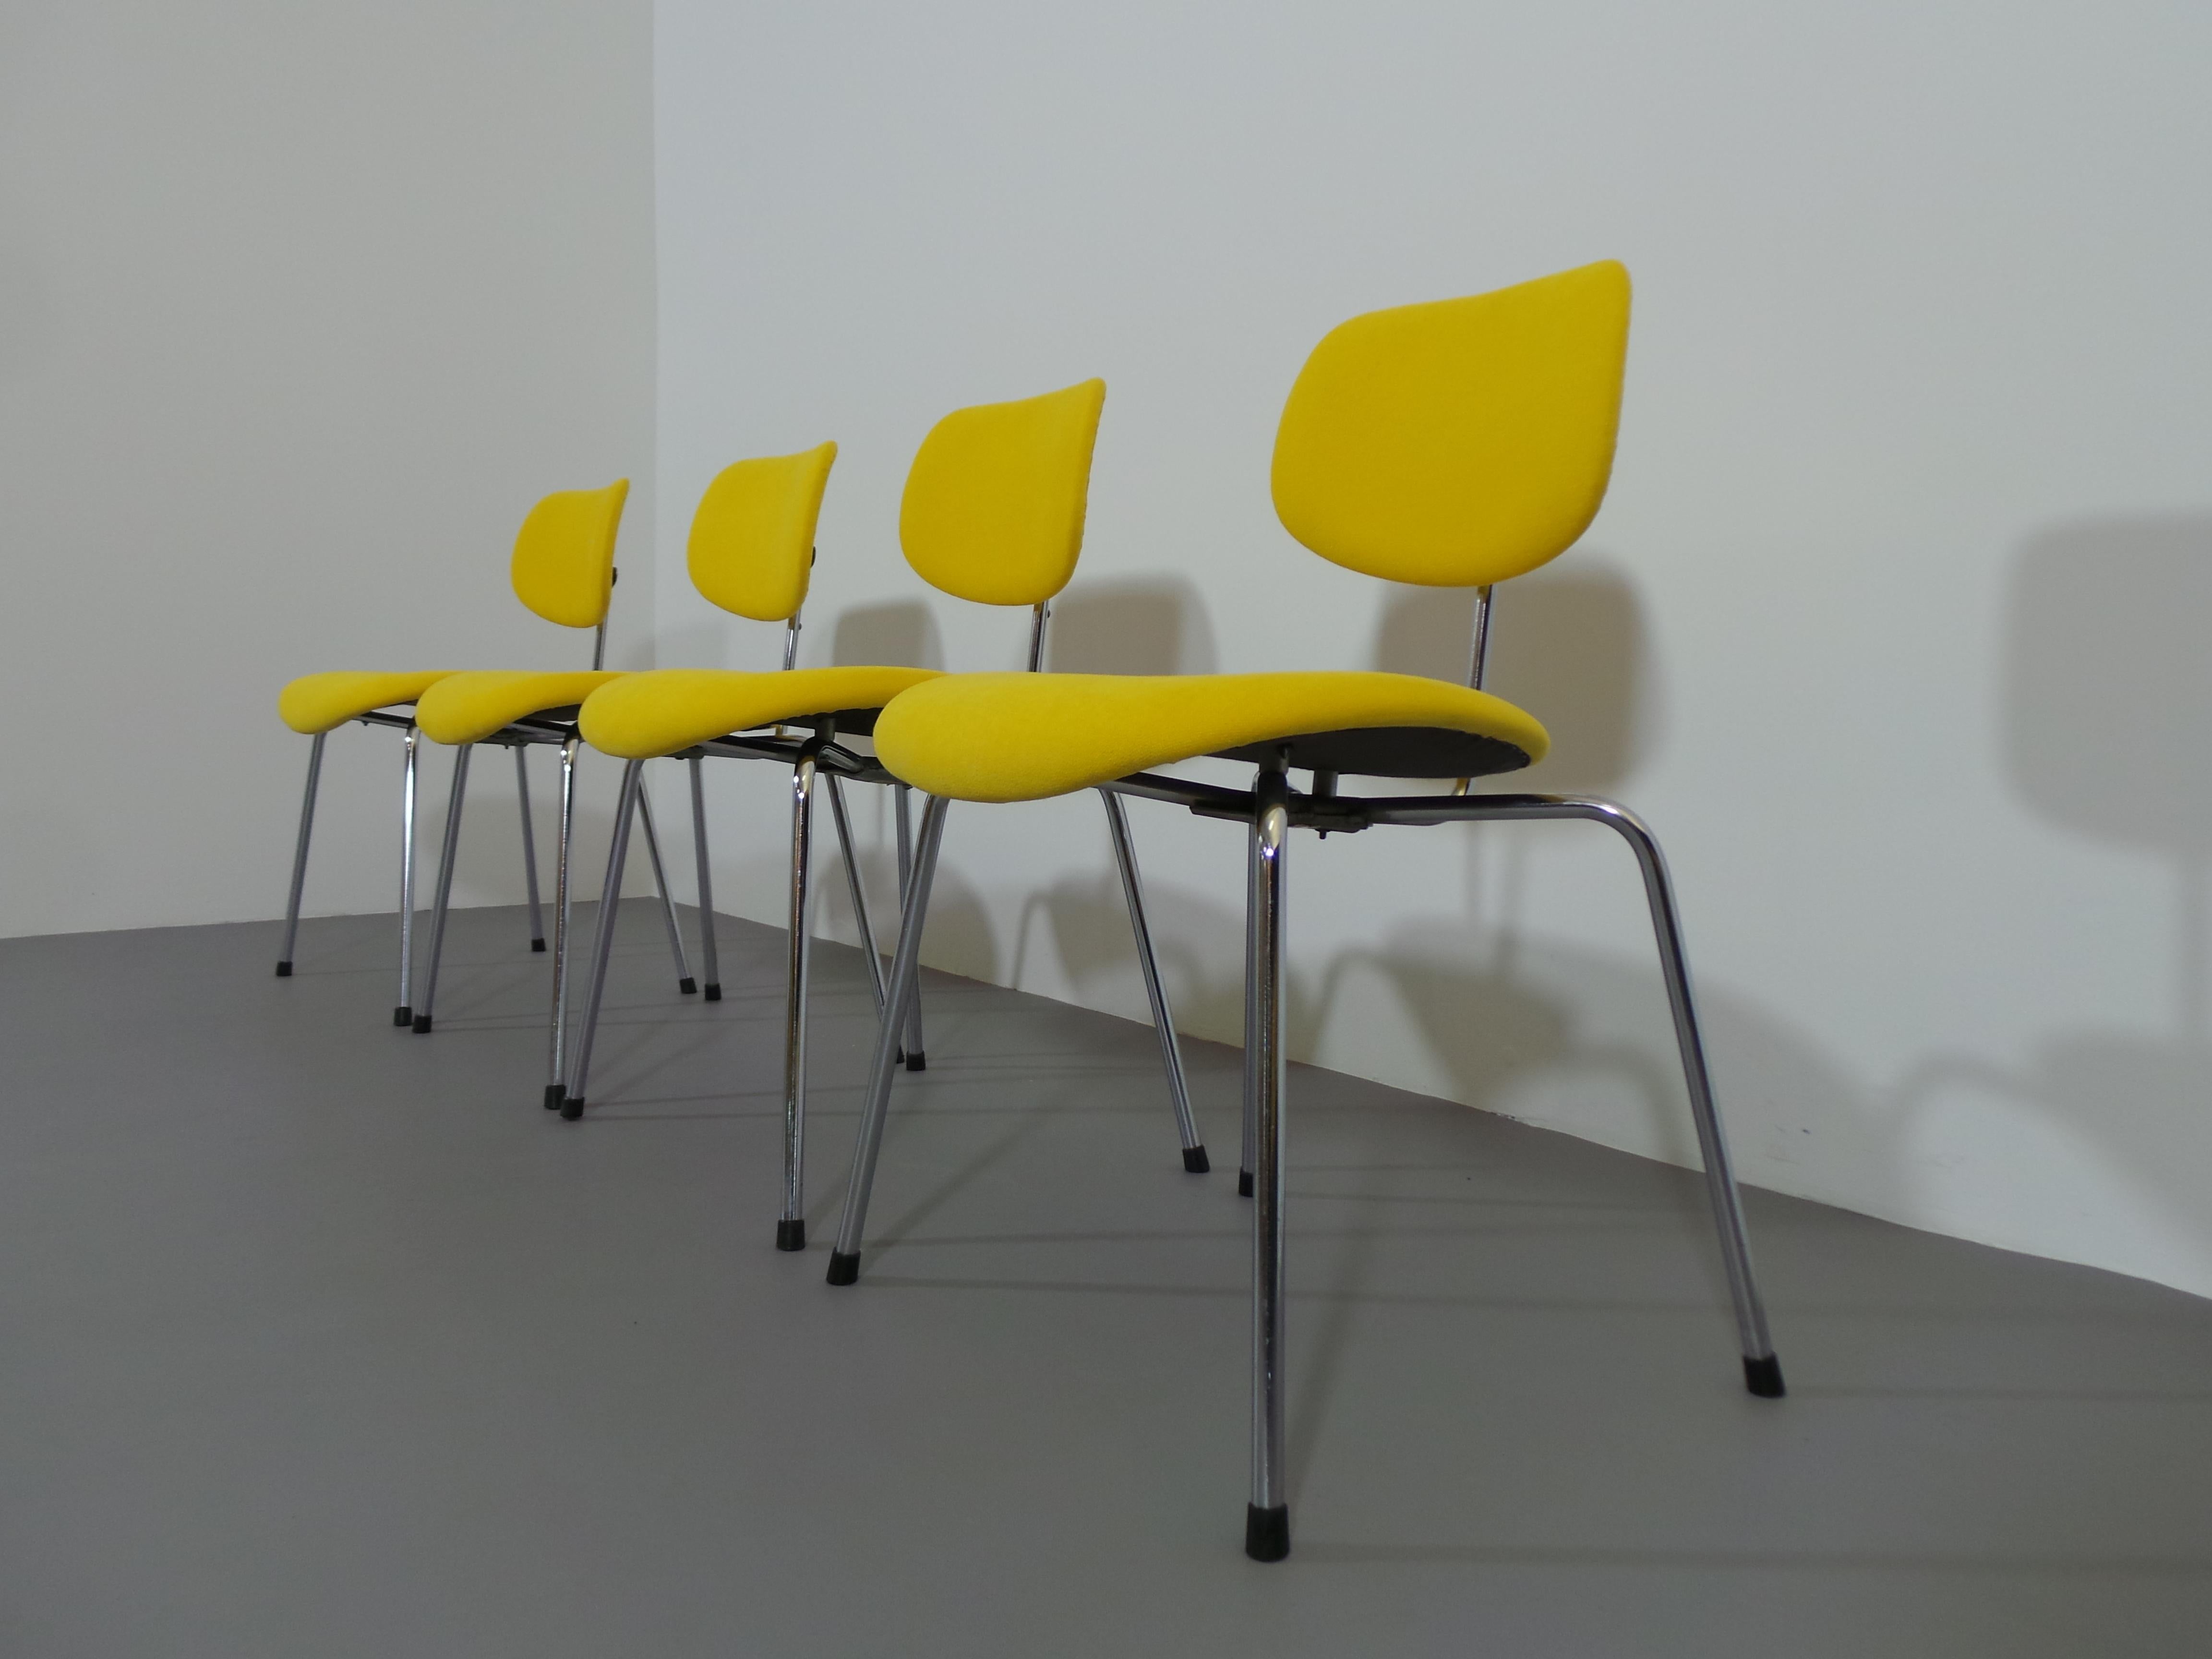 The SE 68 multi-purpose chair by Egon Eiermann is instantly recognisable with its unmistakable silhouette and continues to claim its status as a Mid-Century icon.

Frame chrome-plated tubular steel, upholstered seat and back, yellow fabric cover,